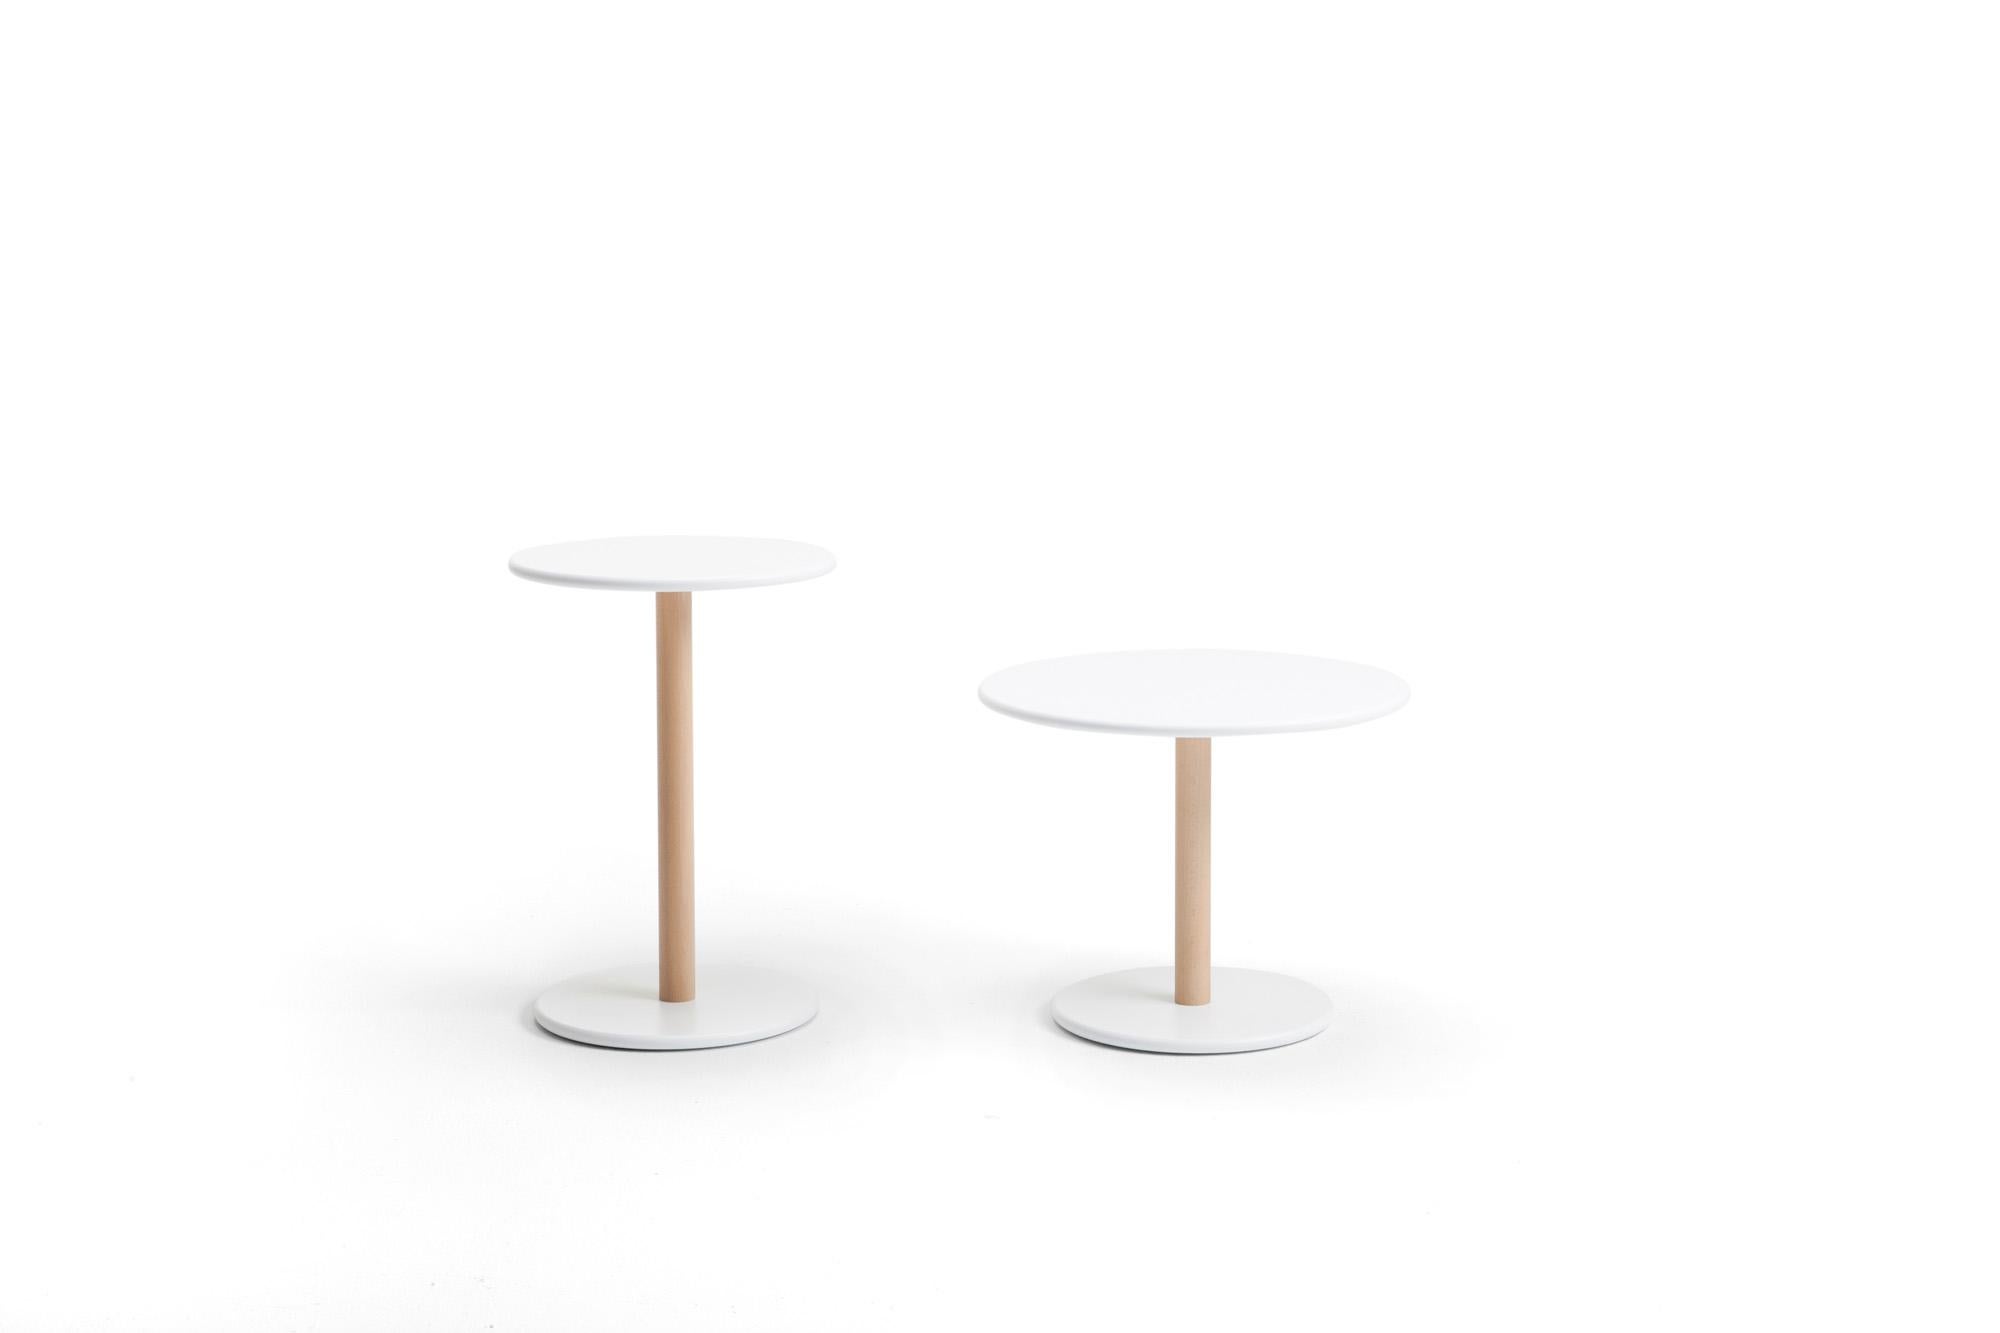 Low tables for home and commercial establishments inspired by the Japanese classics and designed by Naoto Fukasawa for Viccarbe

Two different sizes make them very flexible and suitable for a variety of uses.

Constructed with a natural beech column